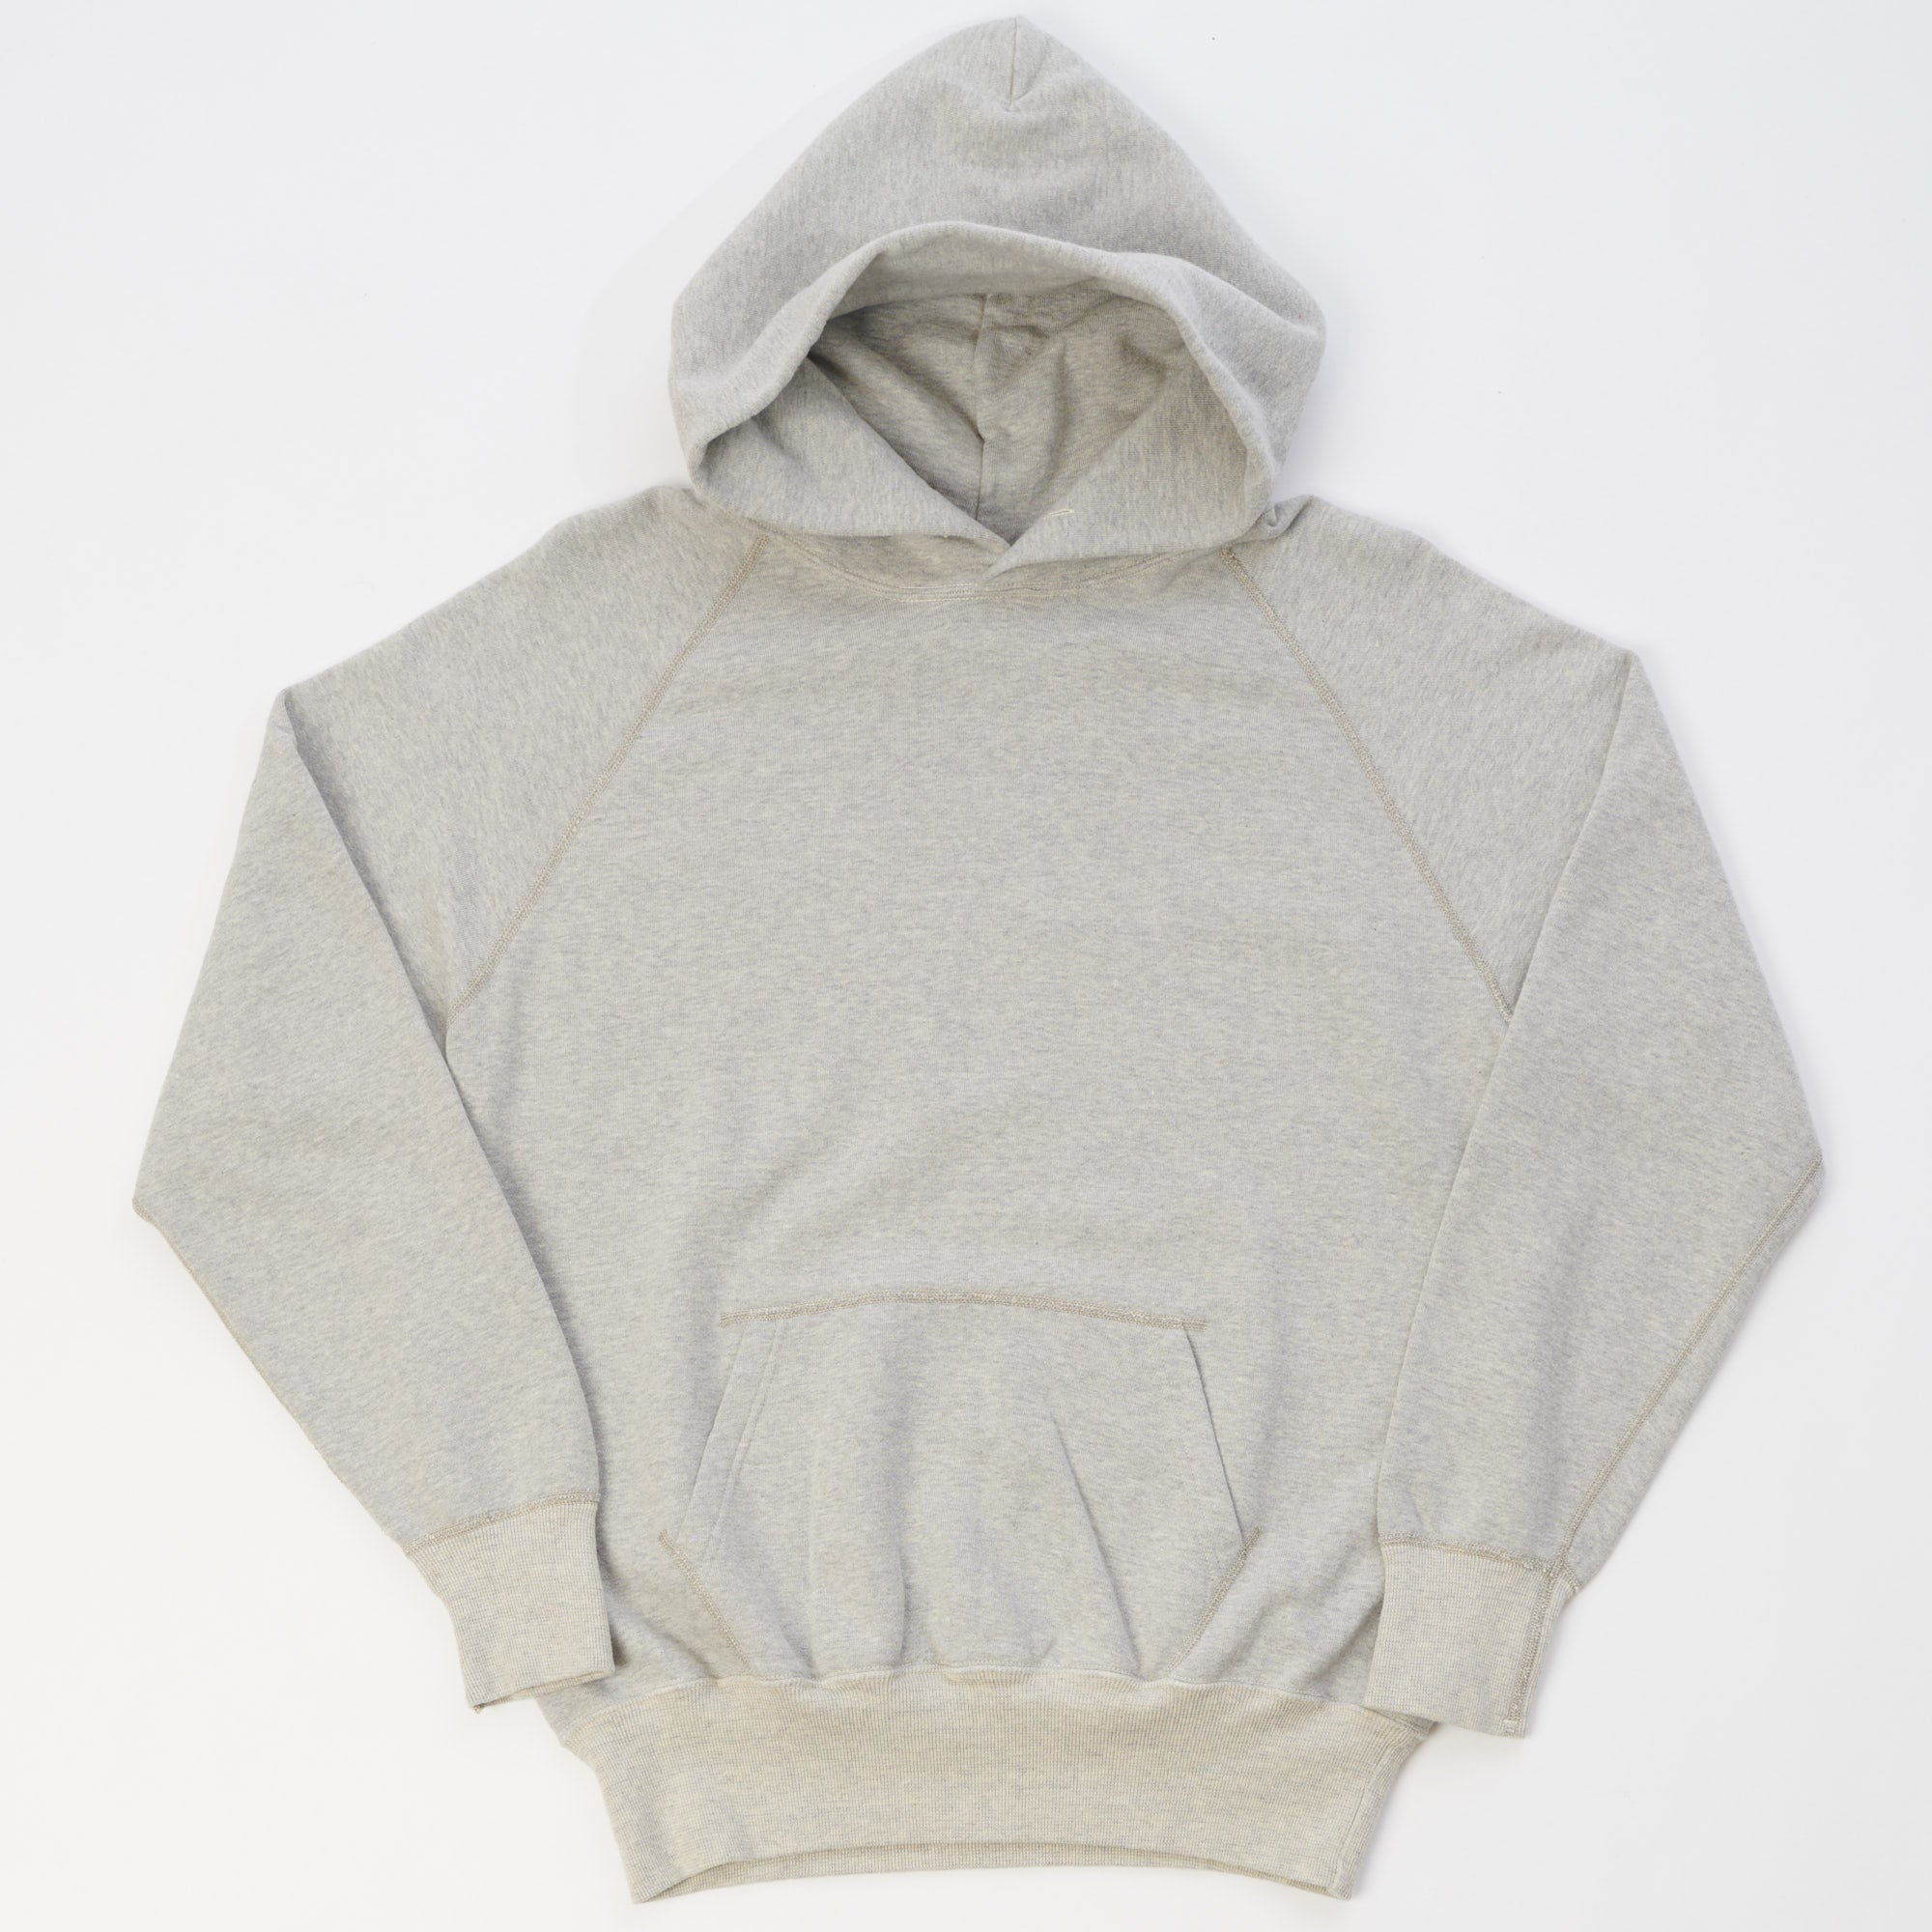 Warehouse 462 Plain Hooded Sweatshirt - Heather Grey | Son of a Stag